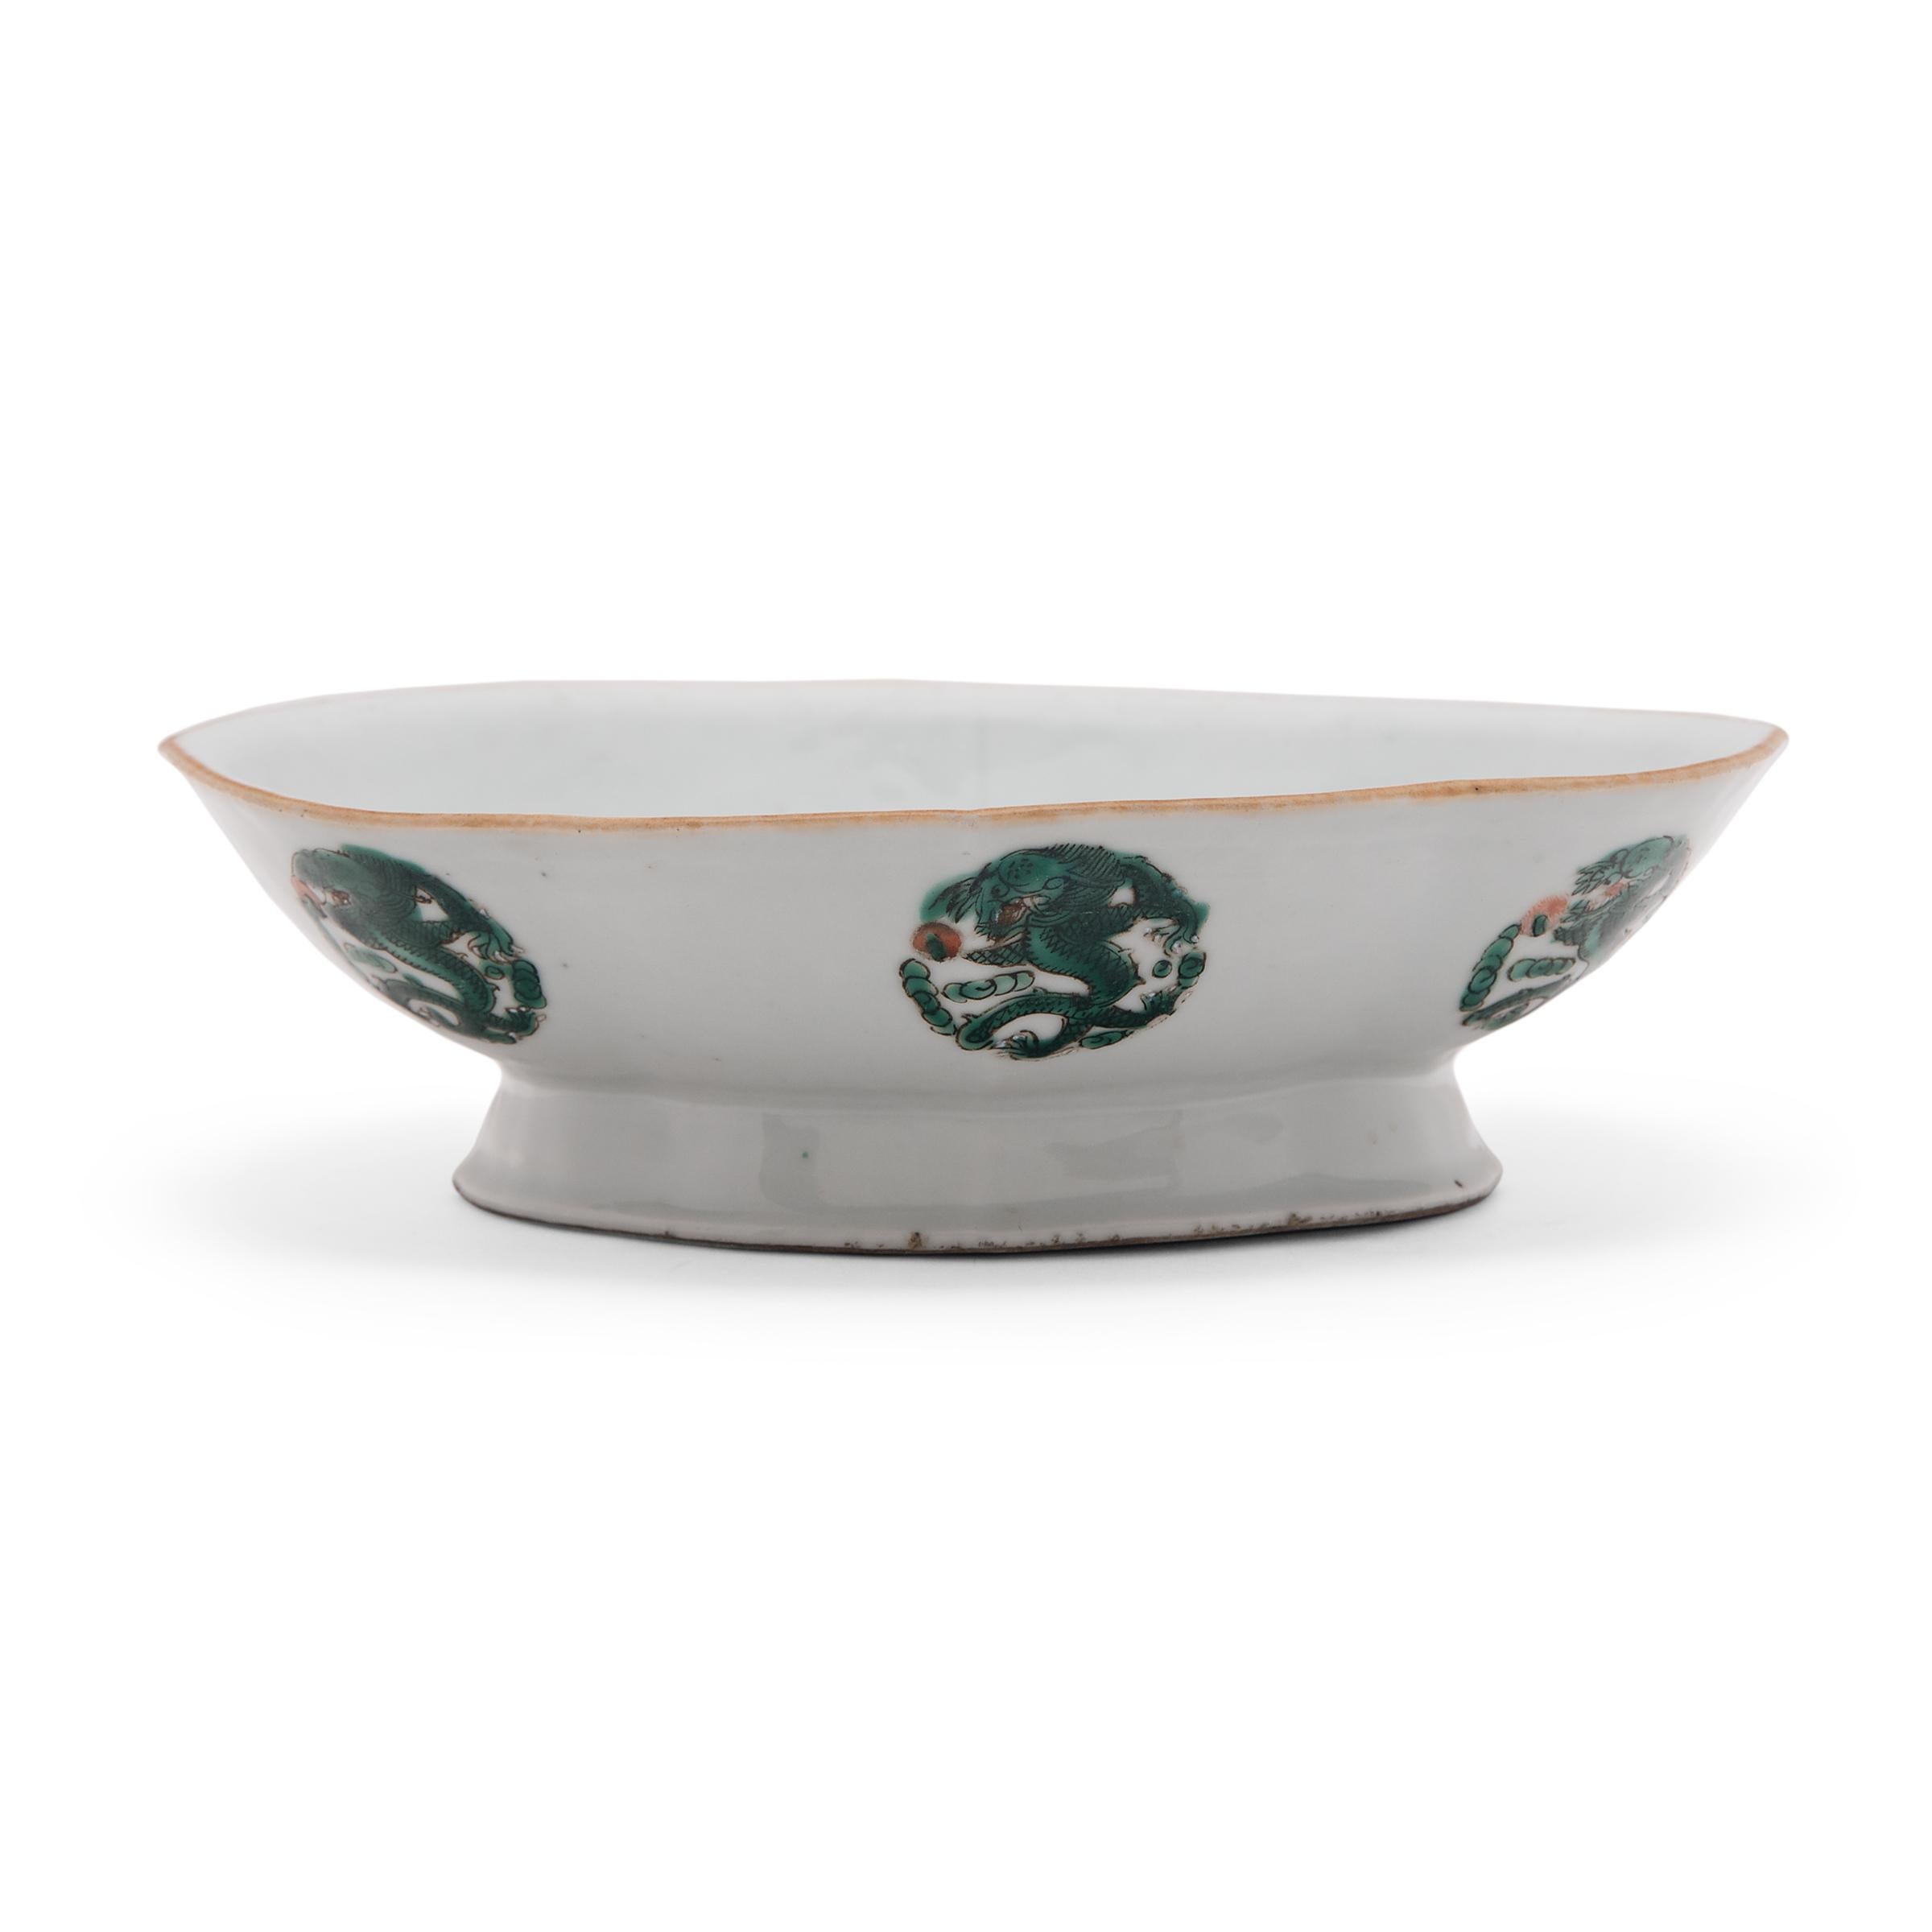 These porcelain bowls date to the mid-19th century and were originally used as serving dishes for ritual offerings, placed before a home altar and piled high with fruits, baked goods, and other foods. Each dish features a short footed base and a